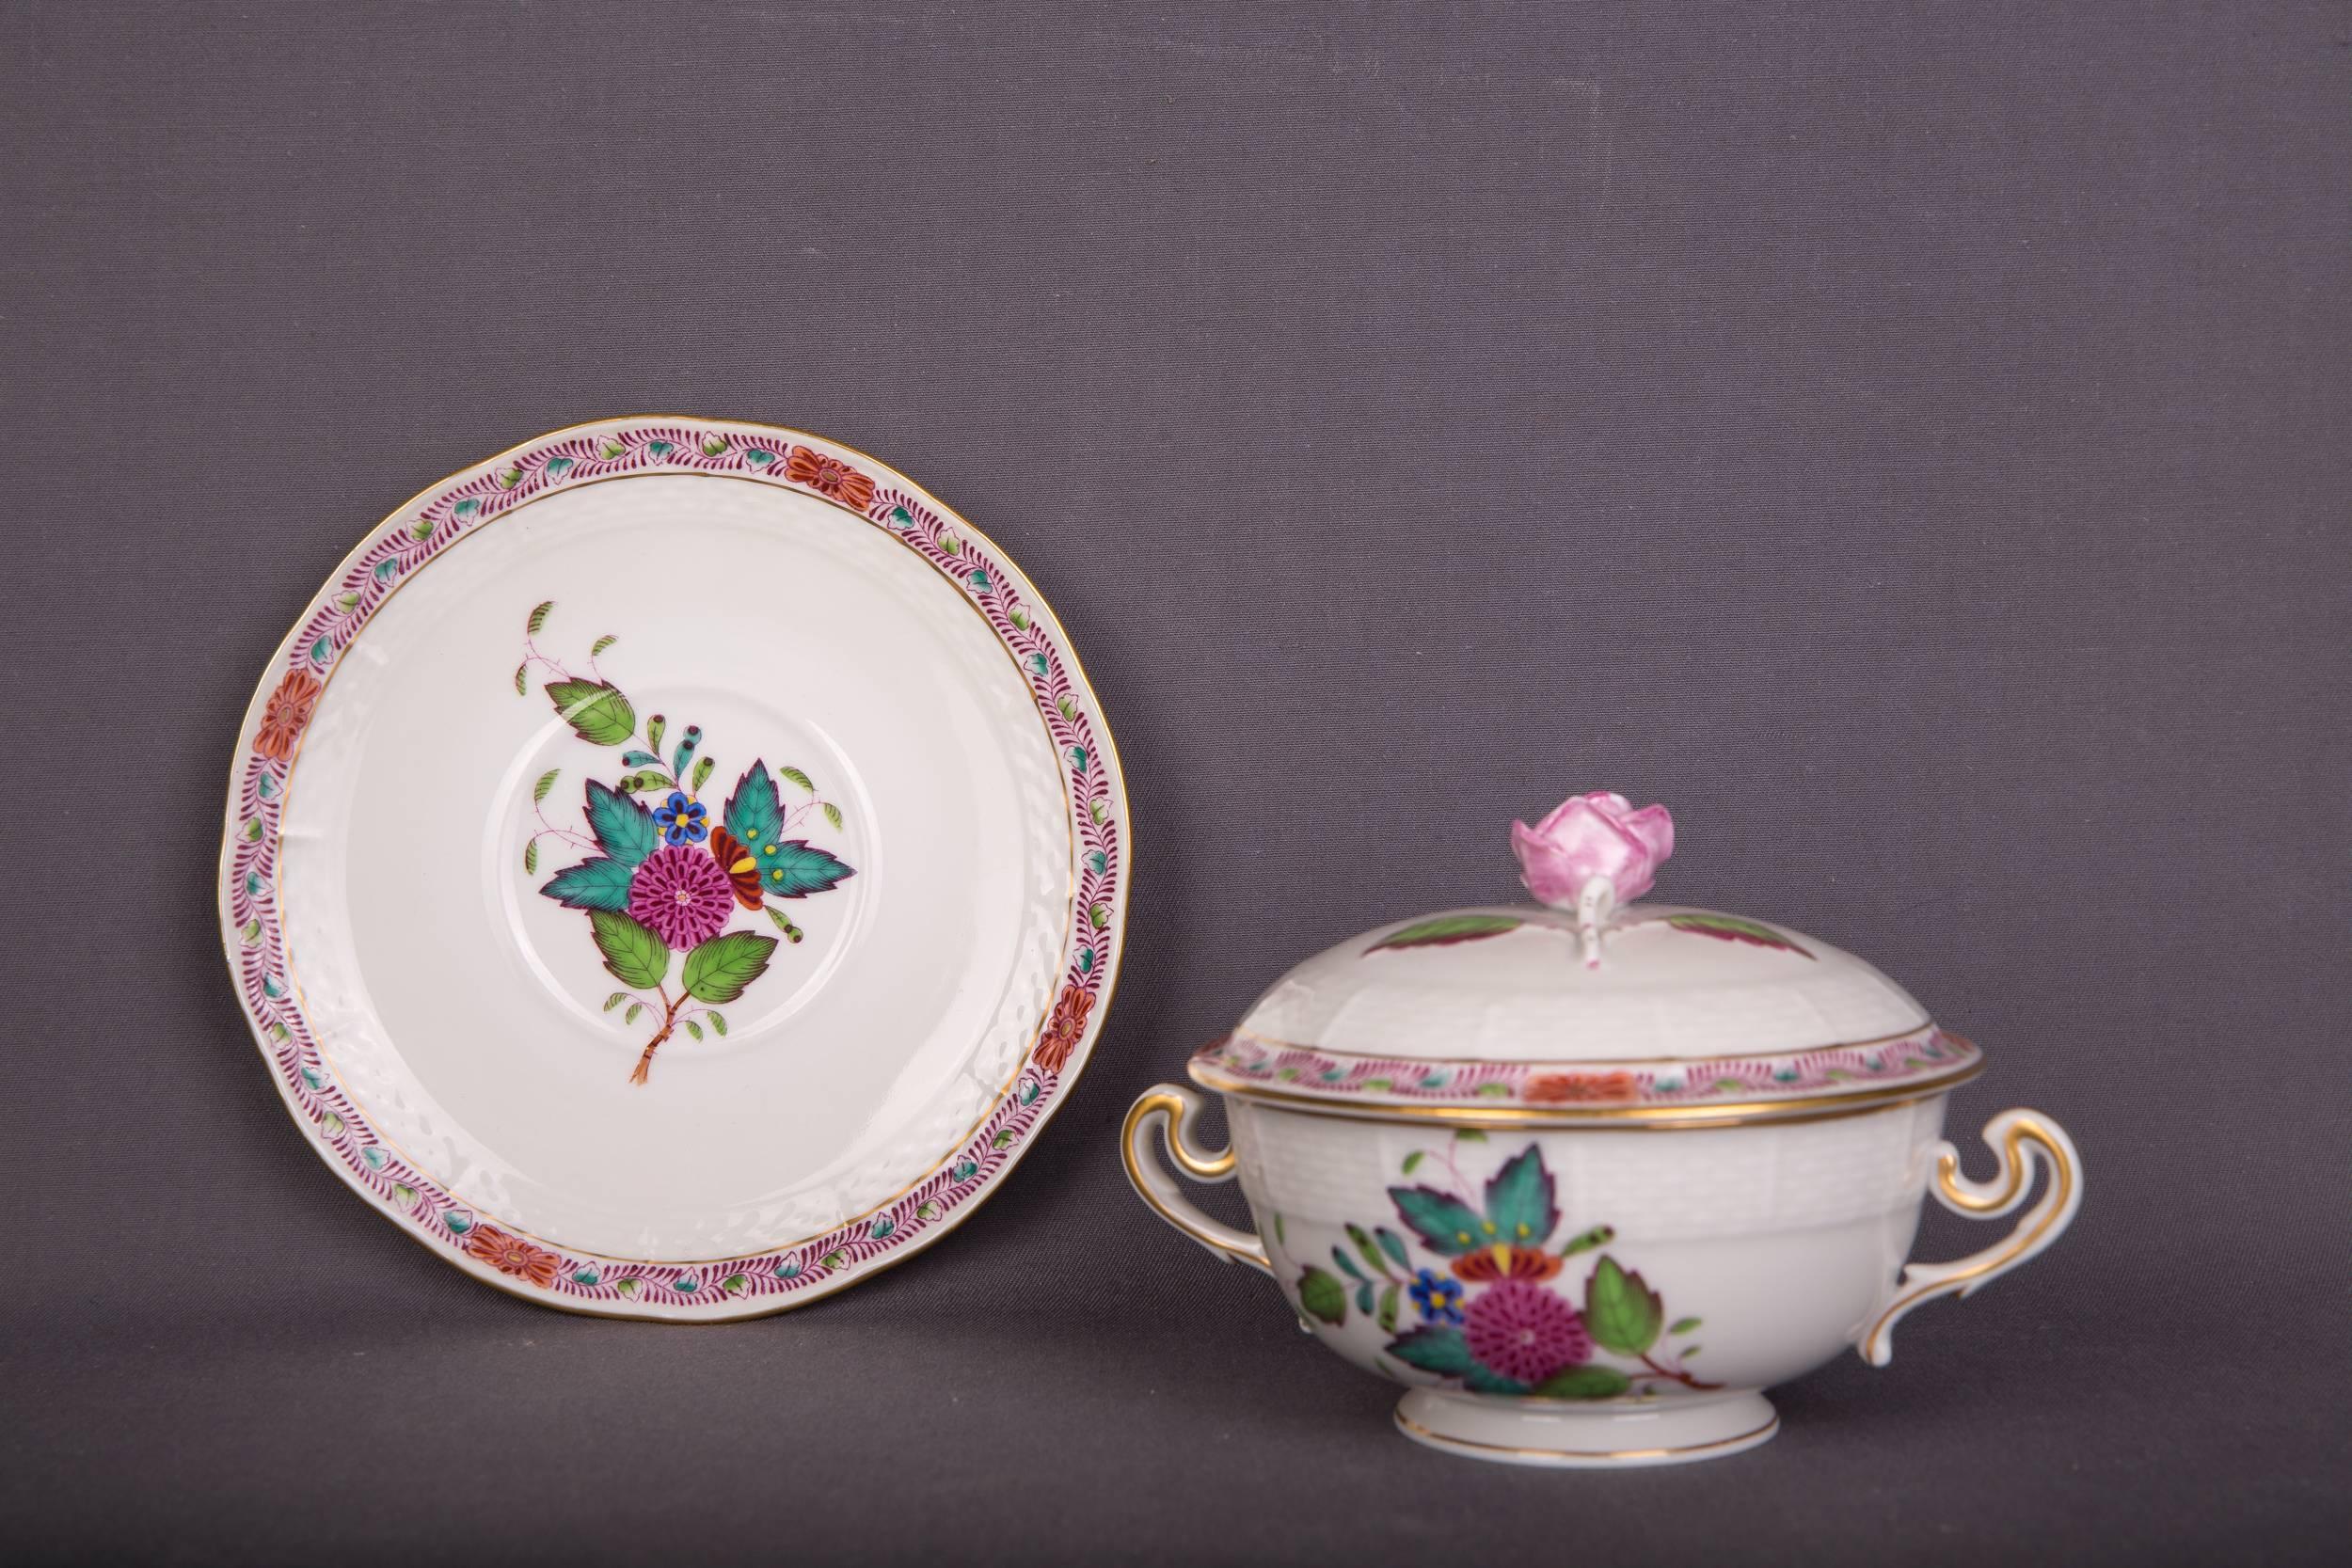 Extensive Rare Herend Dining Service Porcelain with a Lot of Flowers and Gold In Good Condition For Sale In Berlin, DE